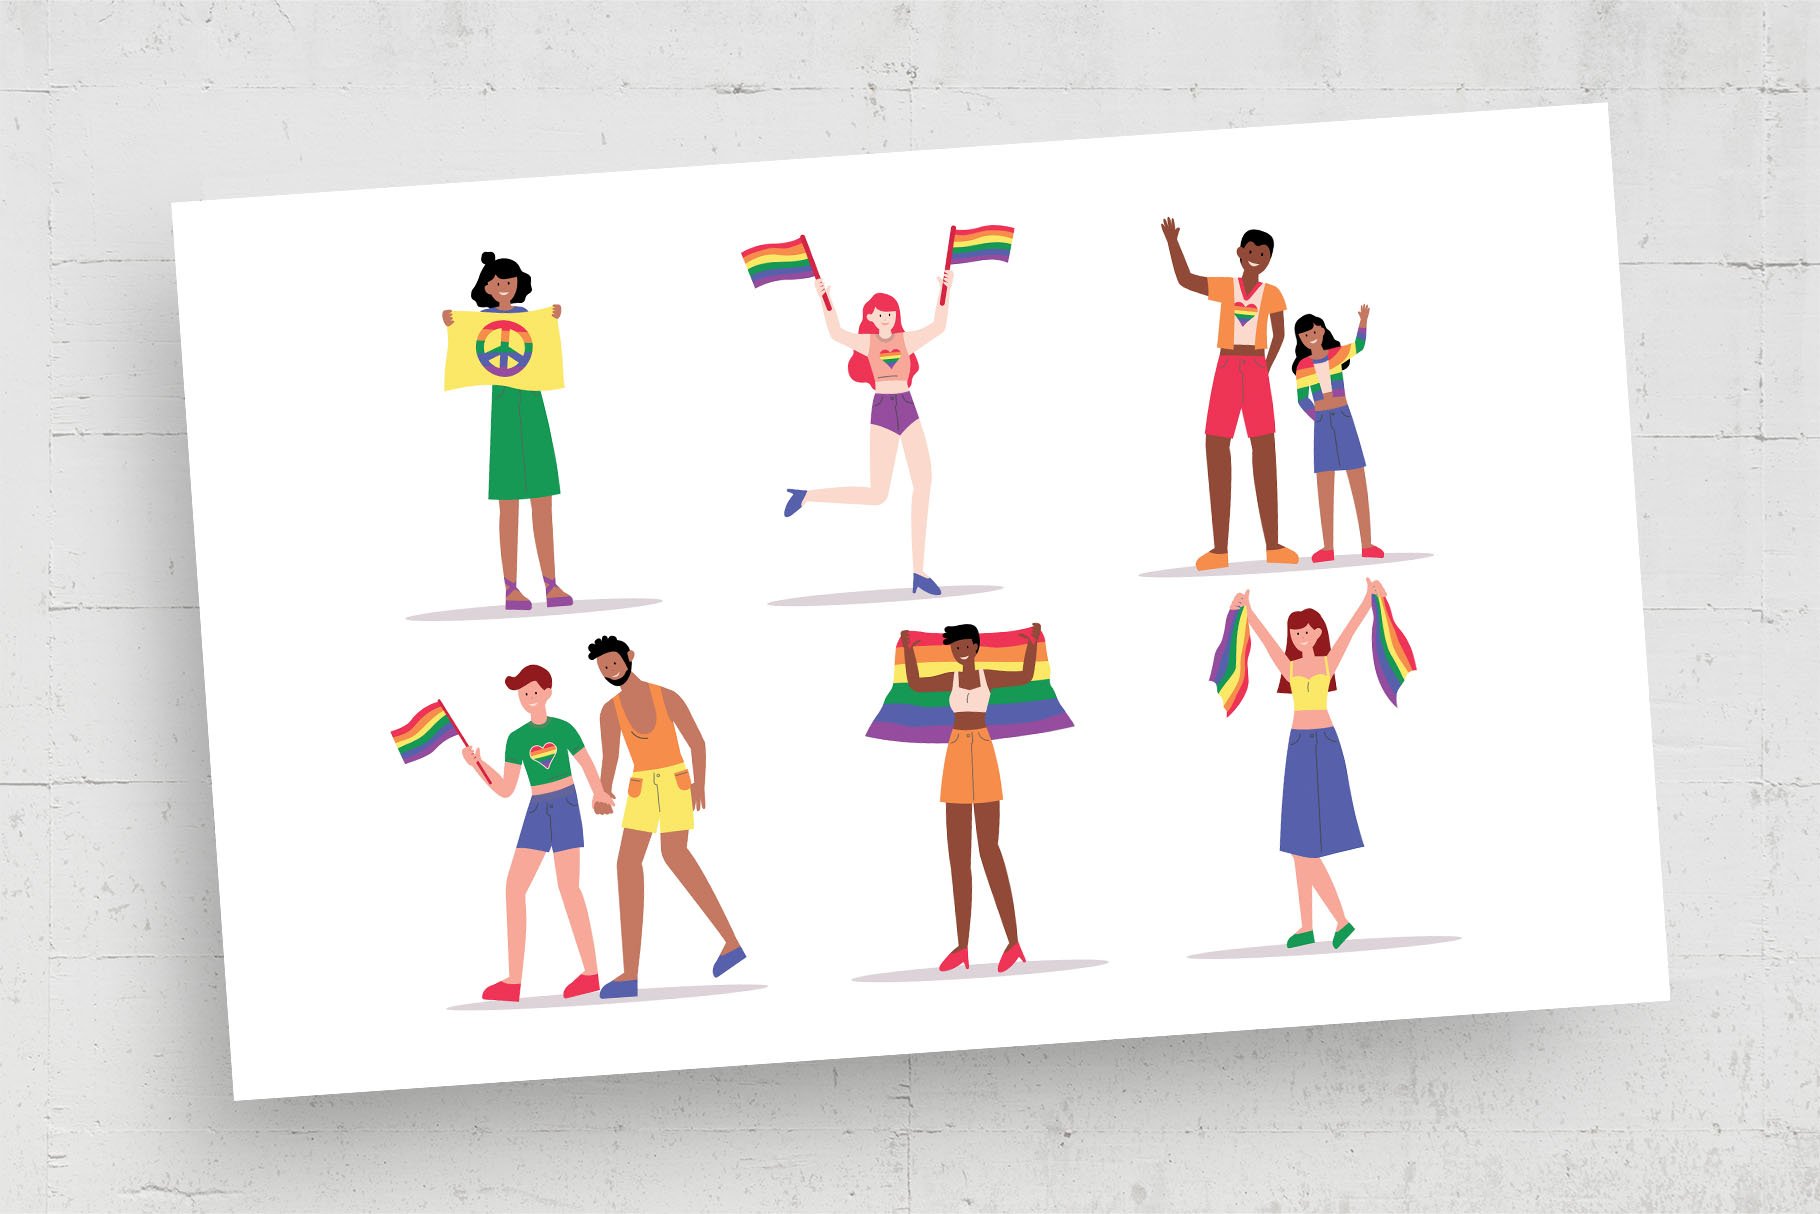 LGBT Activist Character Illustration cover image.